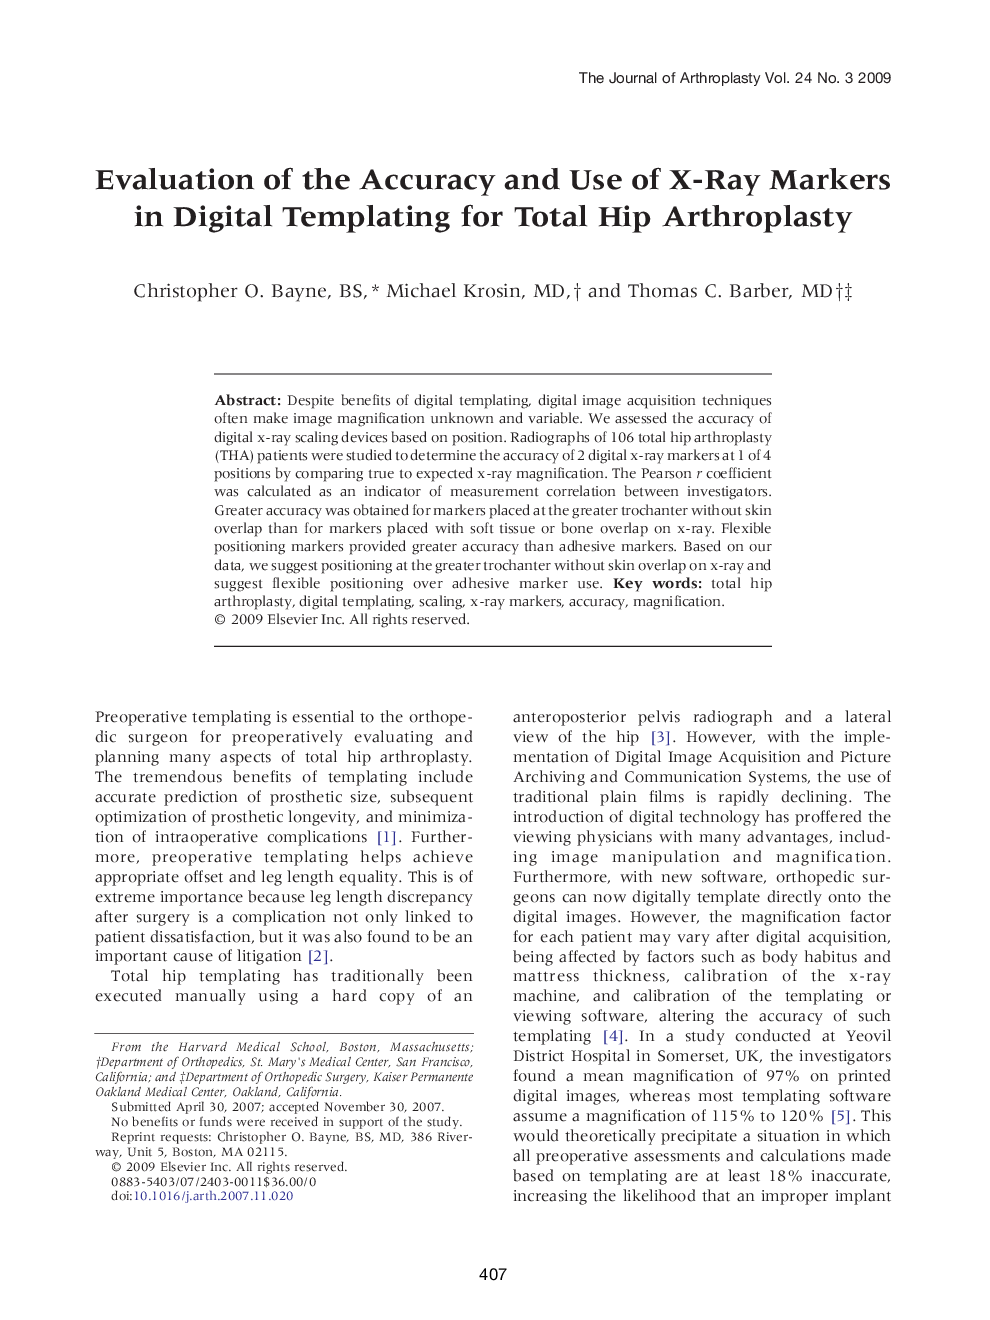 Evaluation of the Accuracy and Use of X-Ray Markers in Digital Templating for Total Hip Arthroplasty 